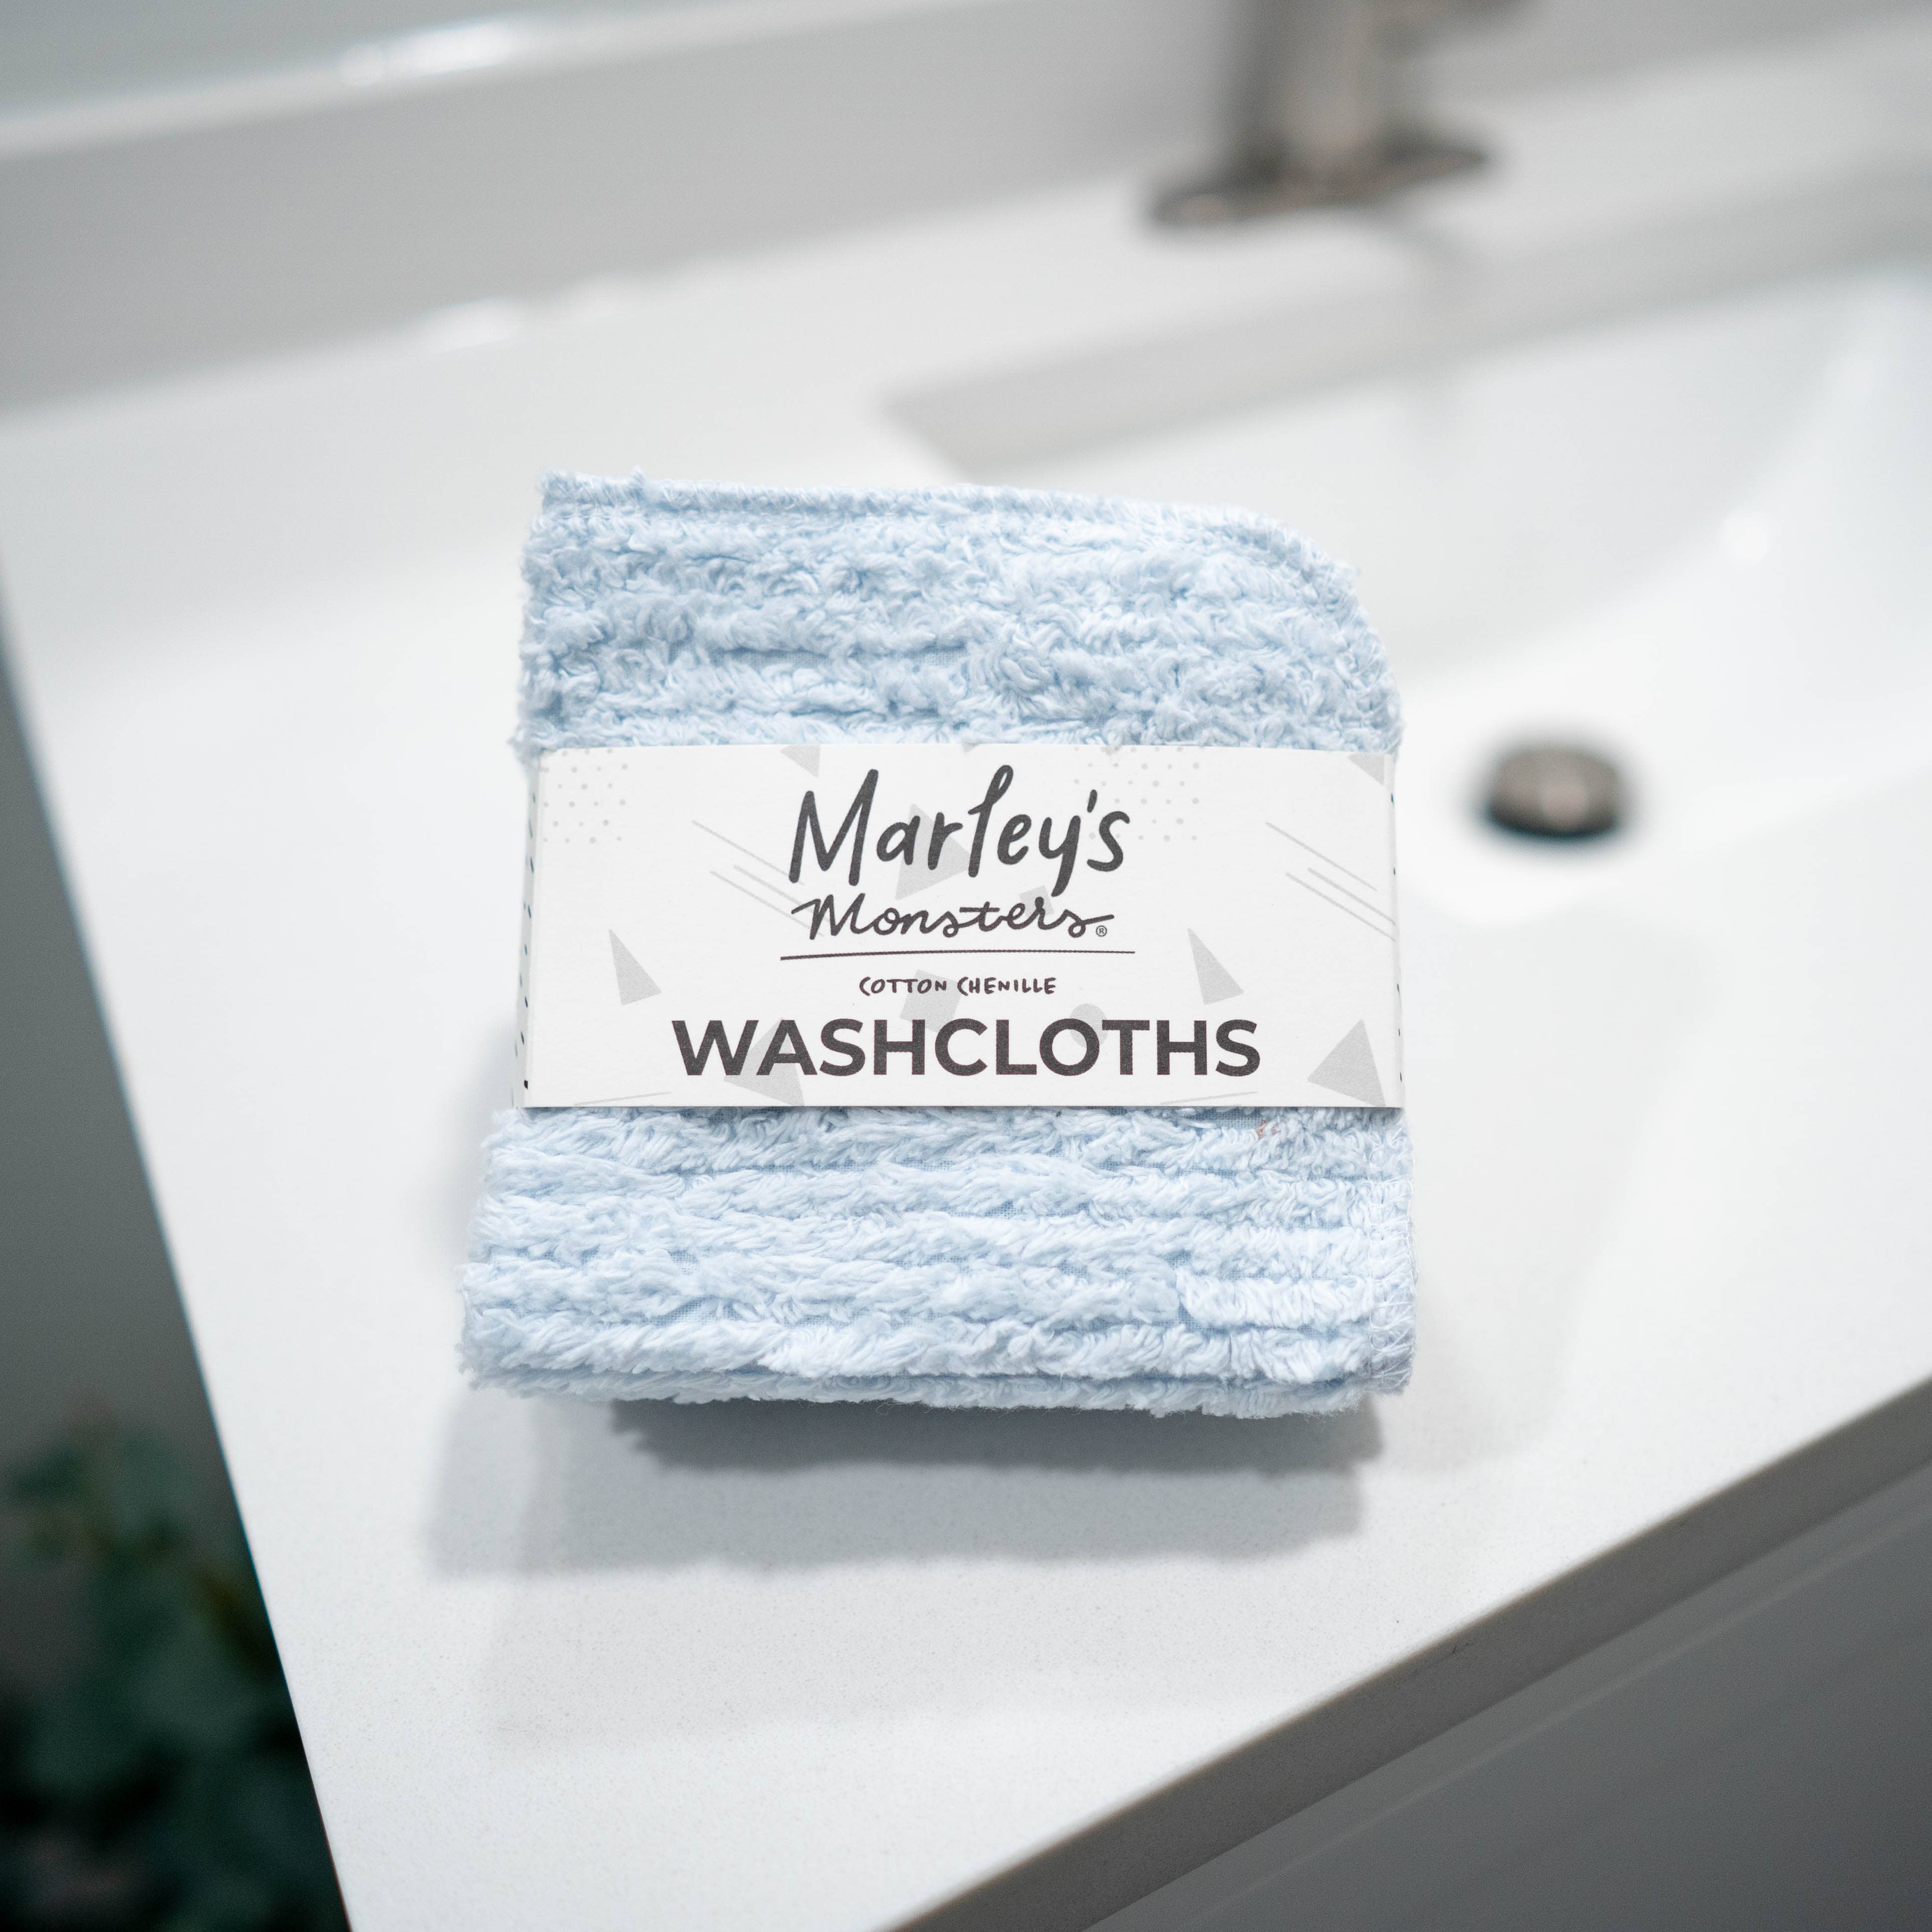 Marley's Monsters - Cotton Chenille Washcloths